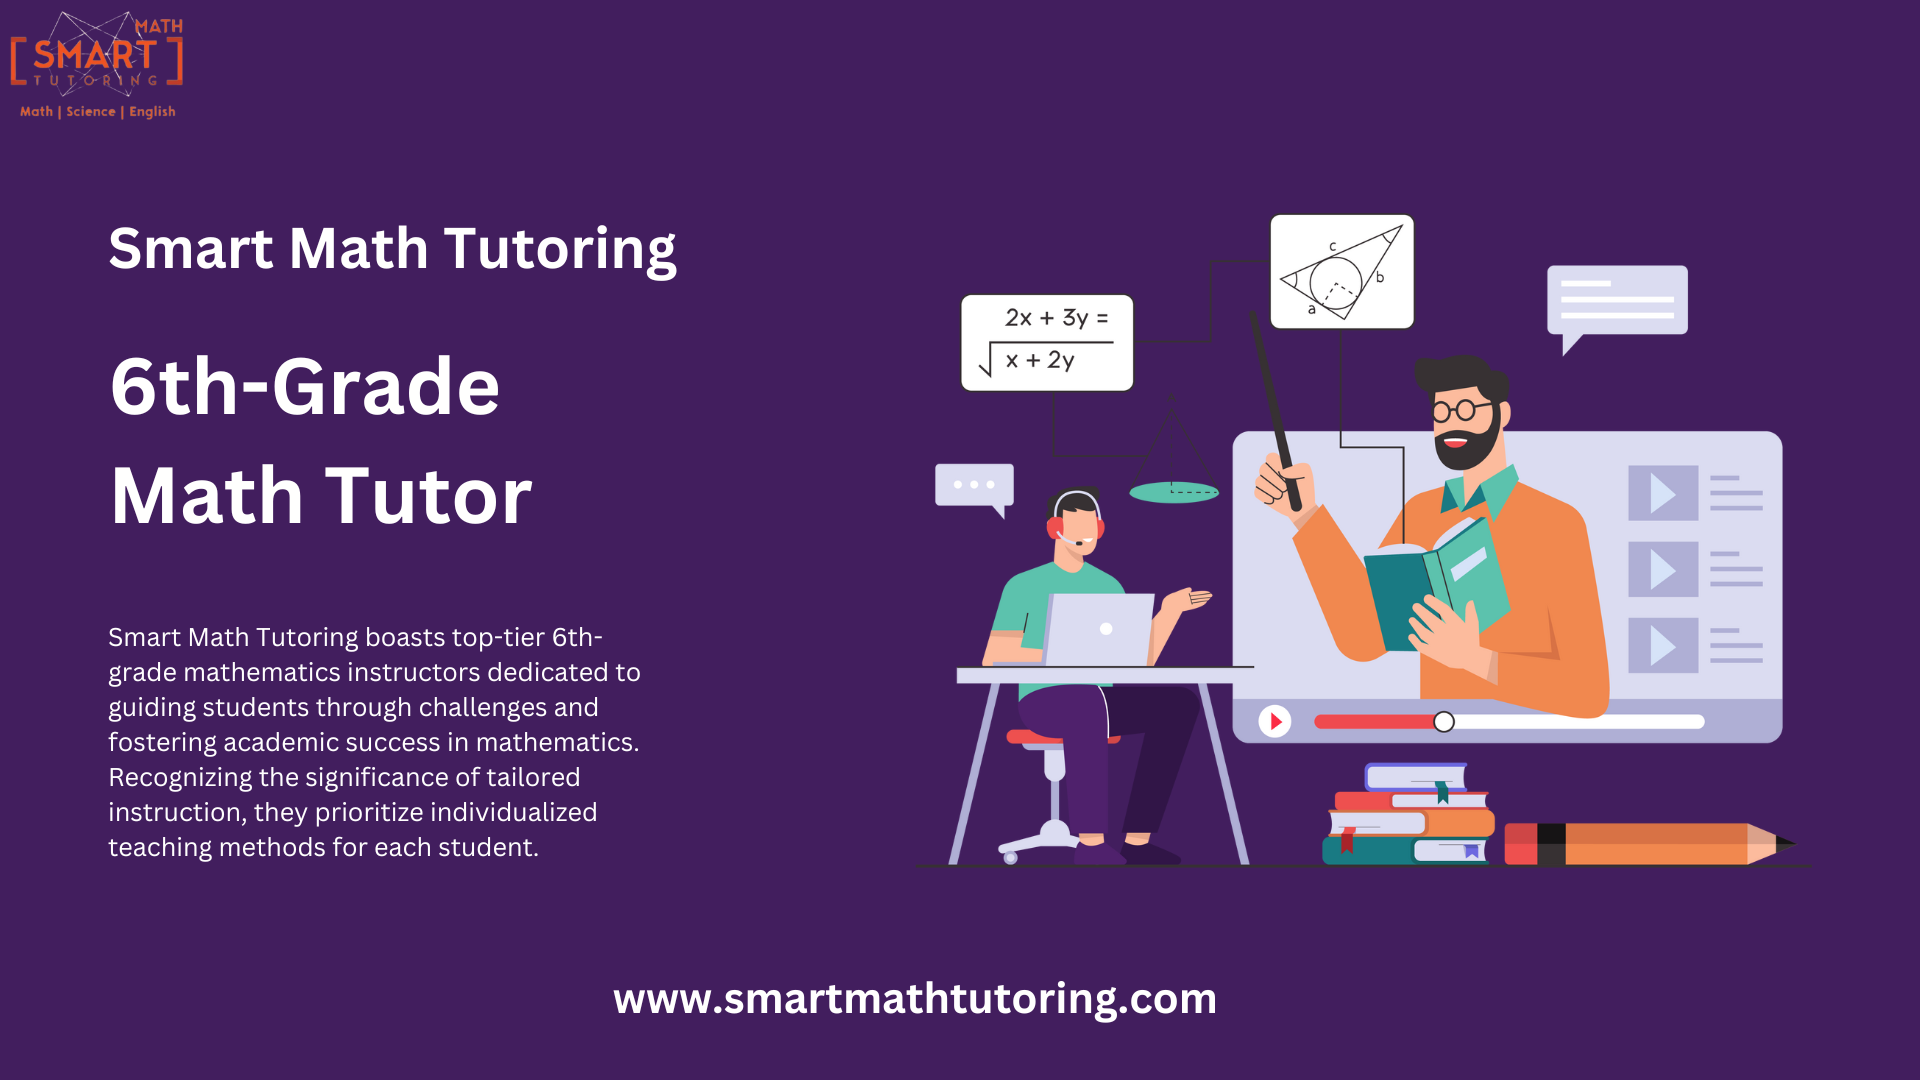 Why A 6th-Grade Math Tutor Is Important for Getting Good at Math – Smart Math tutoring